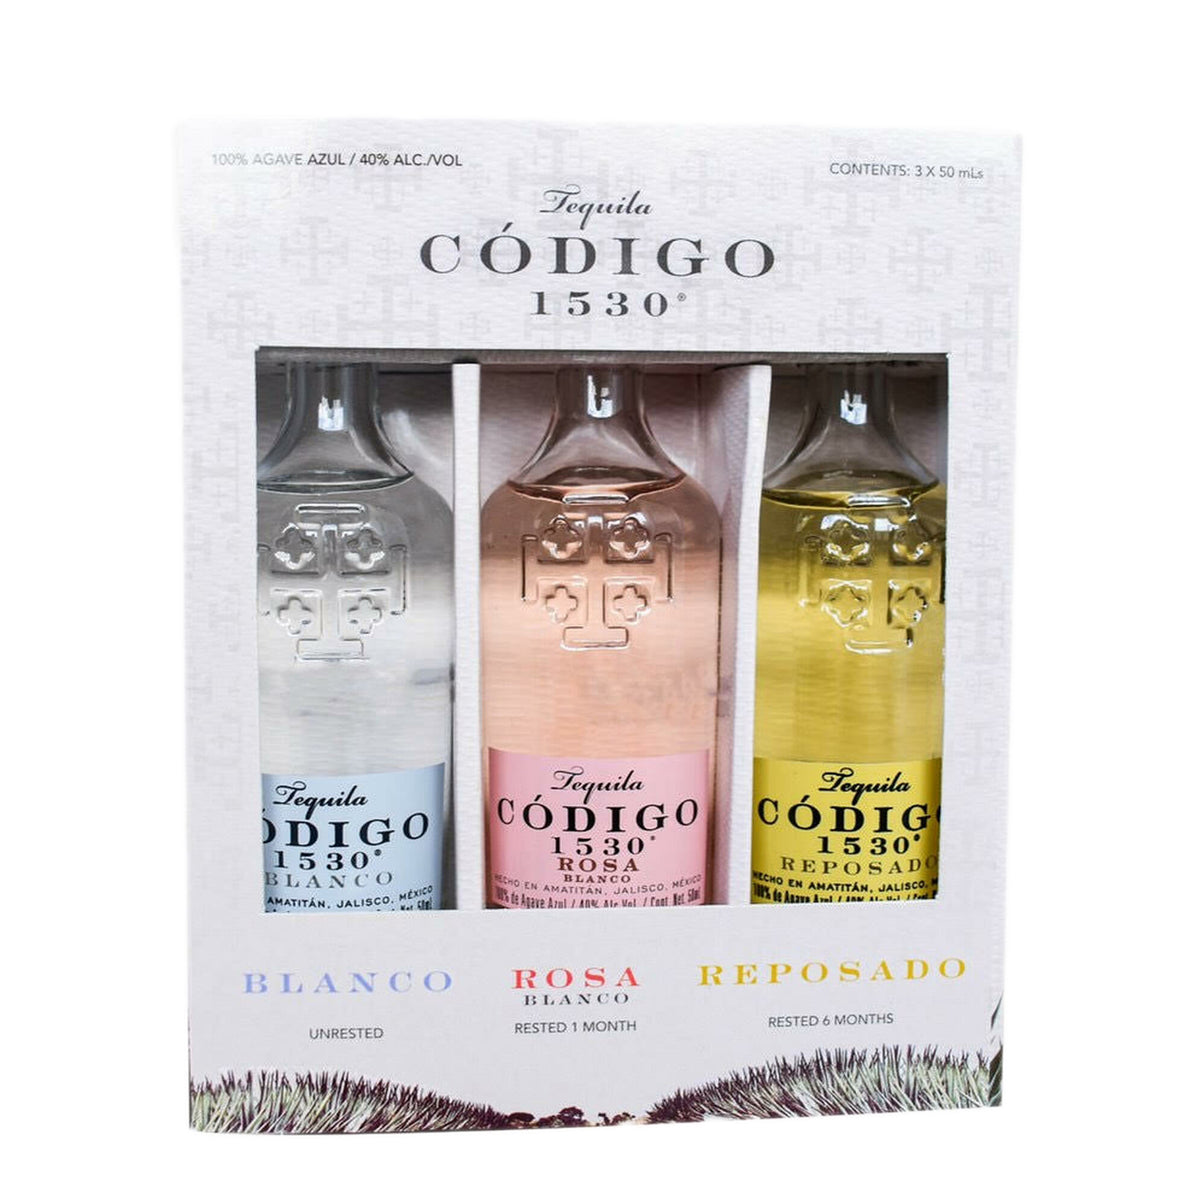 Código 1530 Tequila 5-Pack 50ml Gift Set - Old Town Tequila